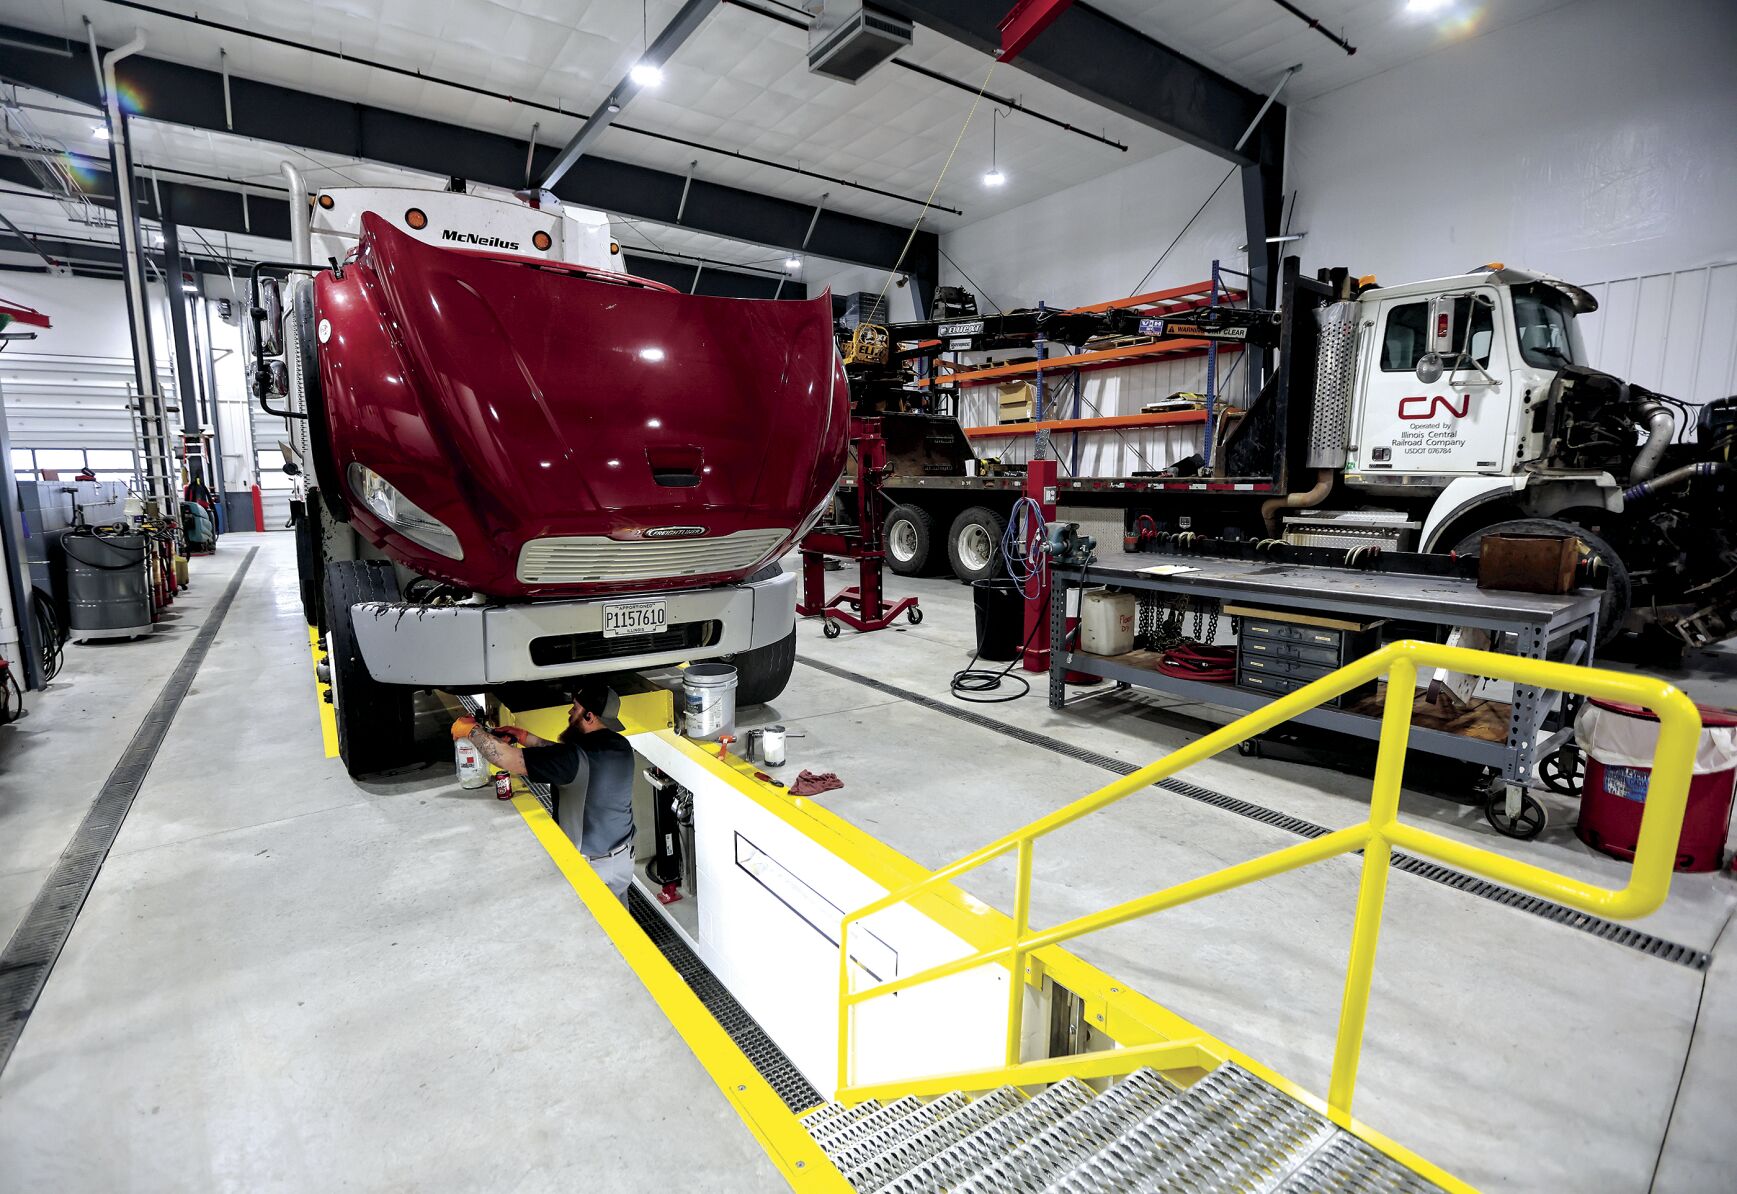 An employee with Guy’s Towing & Service in Galena, Ill., works in the new space on Friday. The longtime family business has opened a new 21,000-square-foot building specializing in repairs and maintenance for trucks, trailers and heavy machinery.    PHOTO CREDIT: Dave Kettering